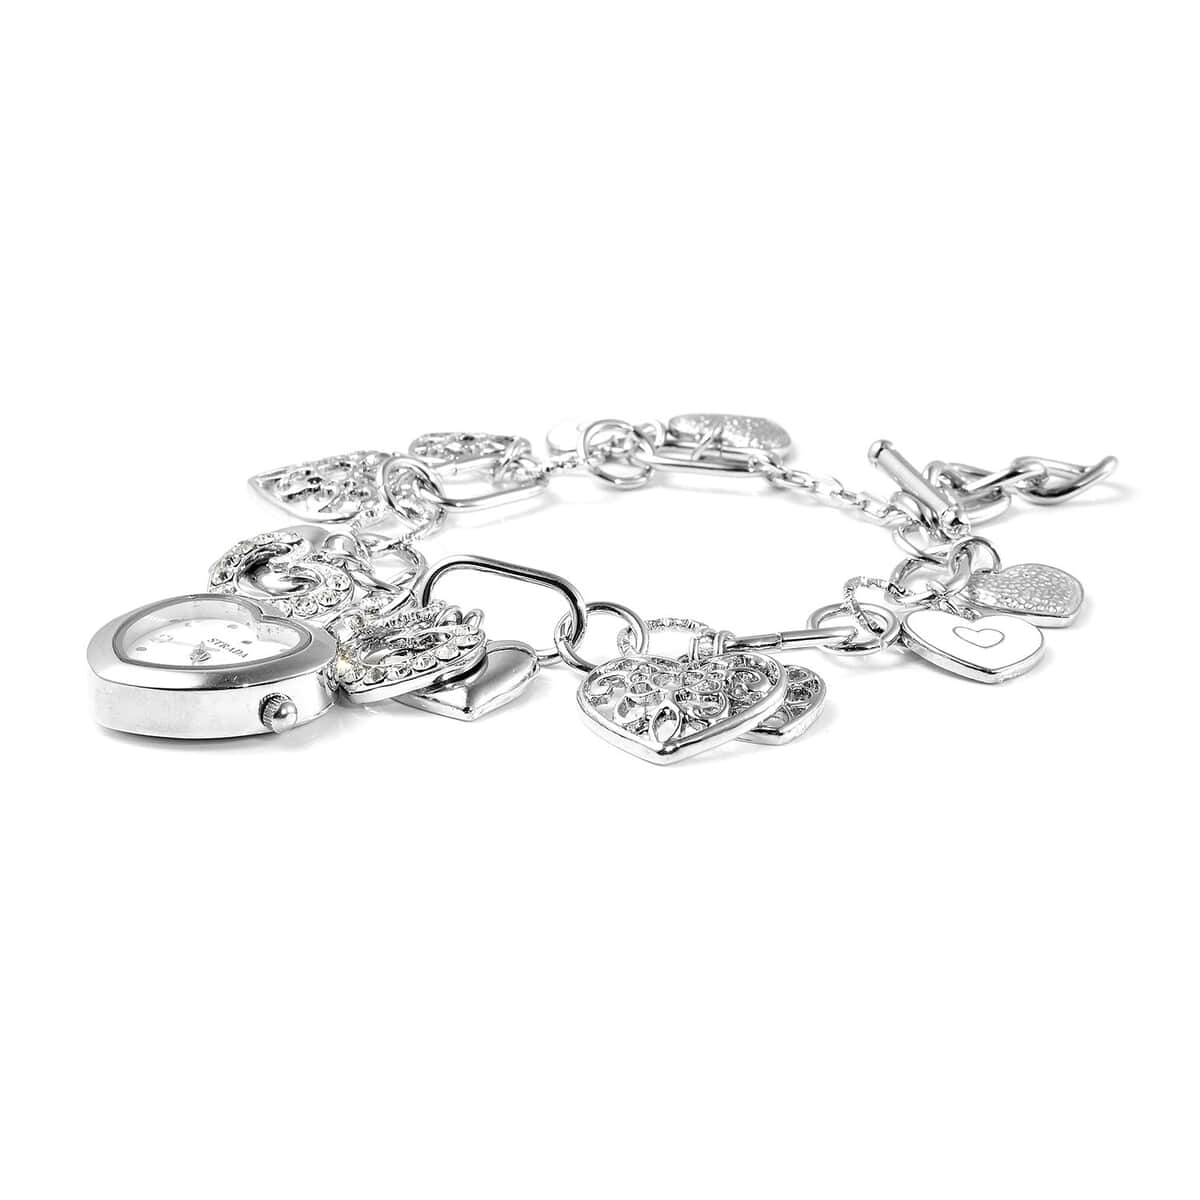 STRADA White Austrian Crystal, Enameled Japanese Movement Charm Heart Bracelet Watch in Silvertone (7.5-9 in) image number 2